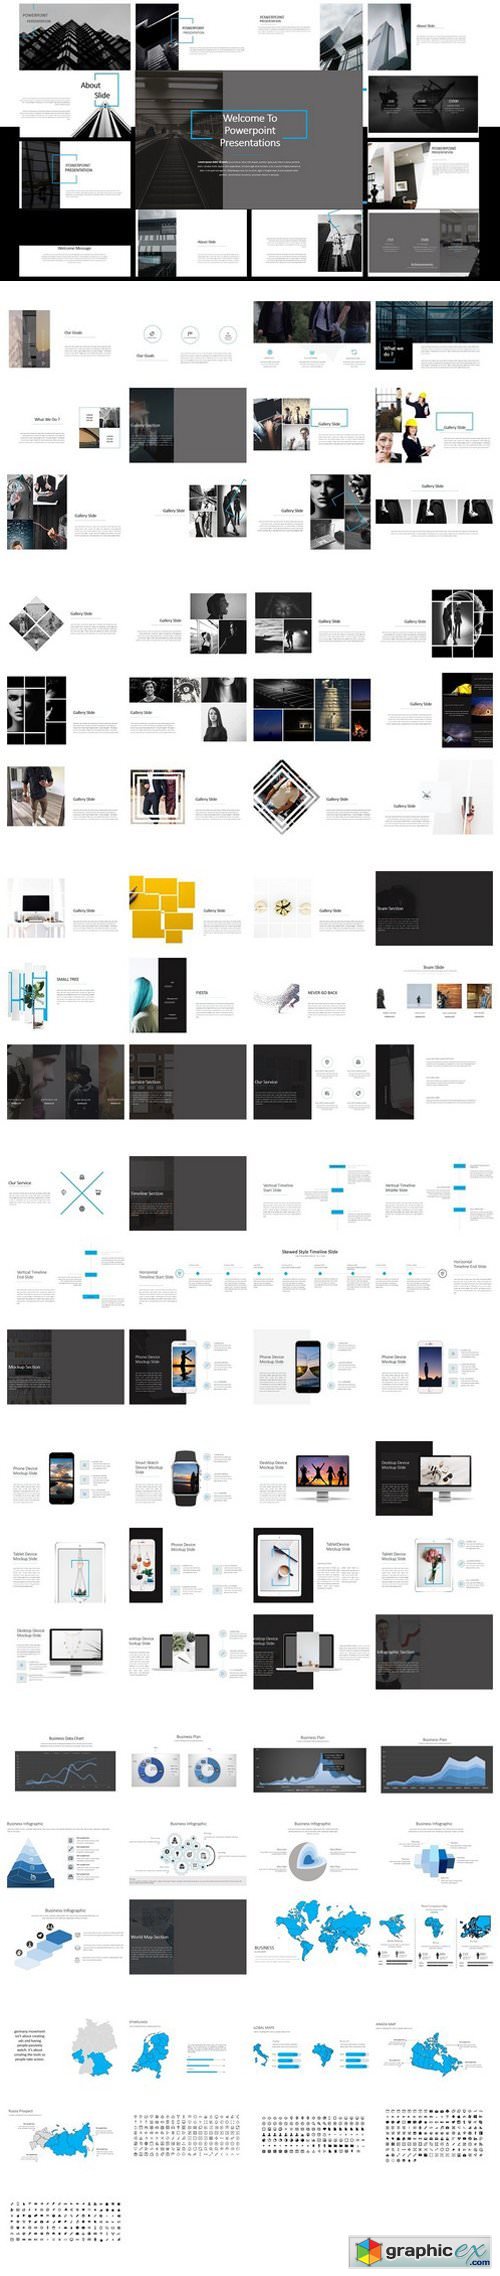 POWERPOINT PRESENTATIONS TEMPLATE